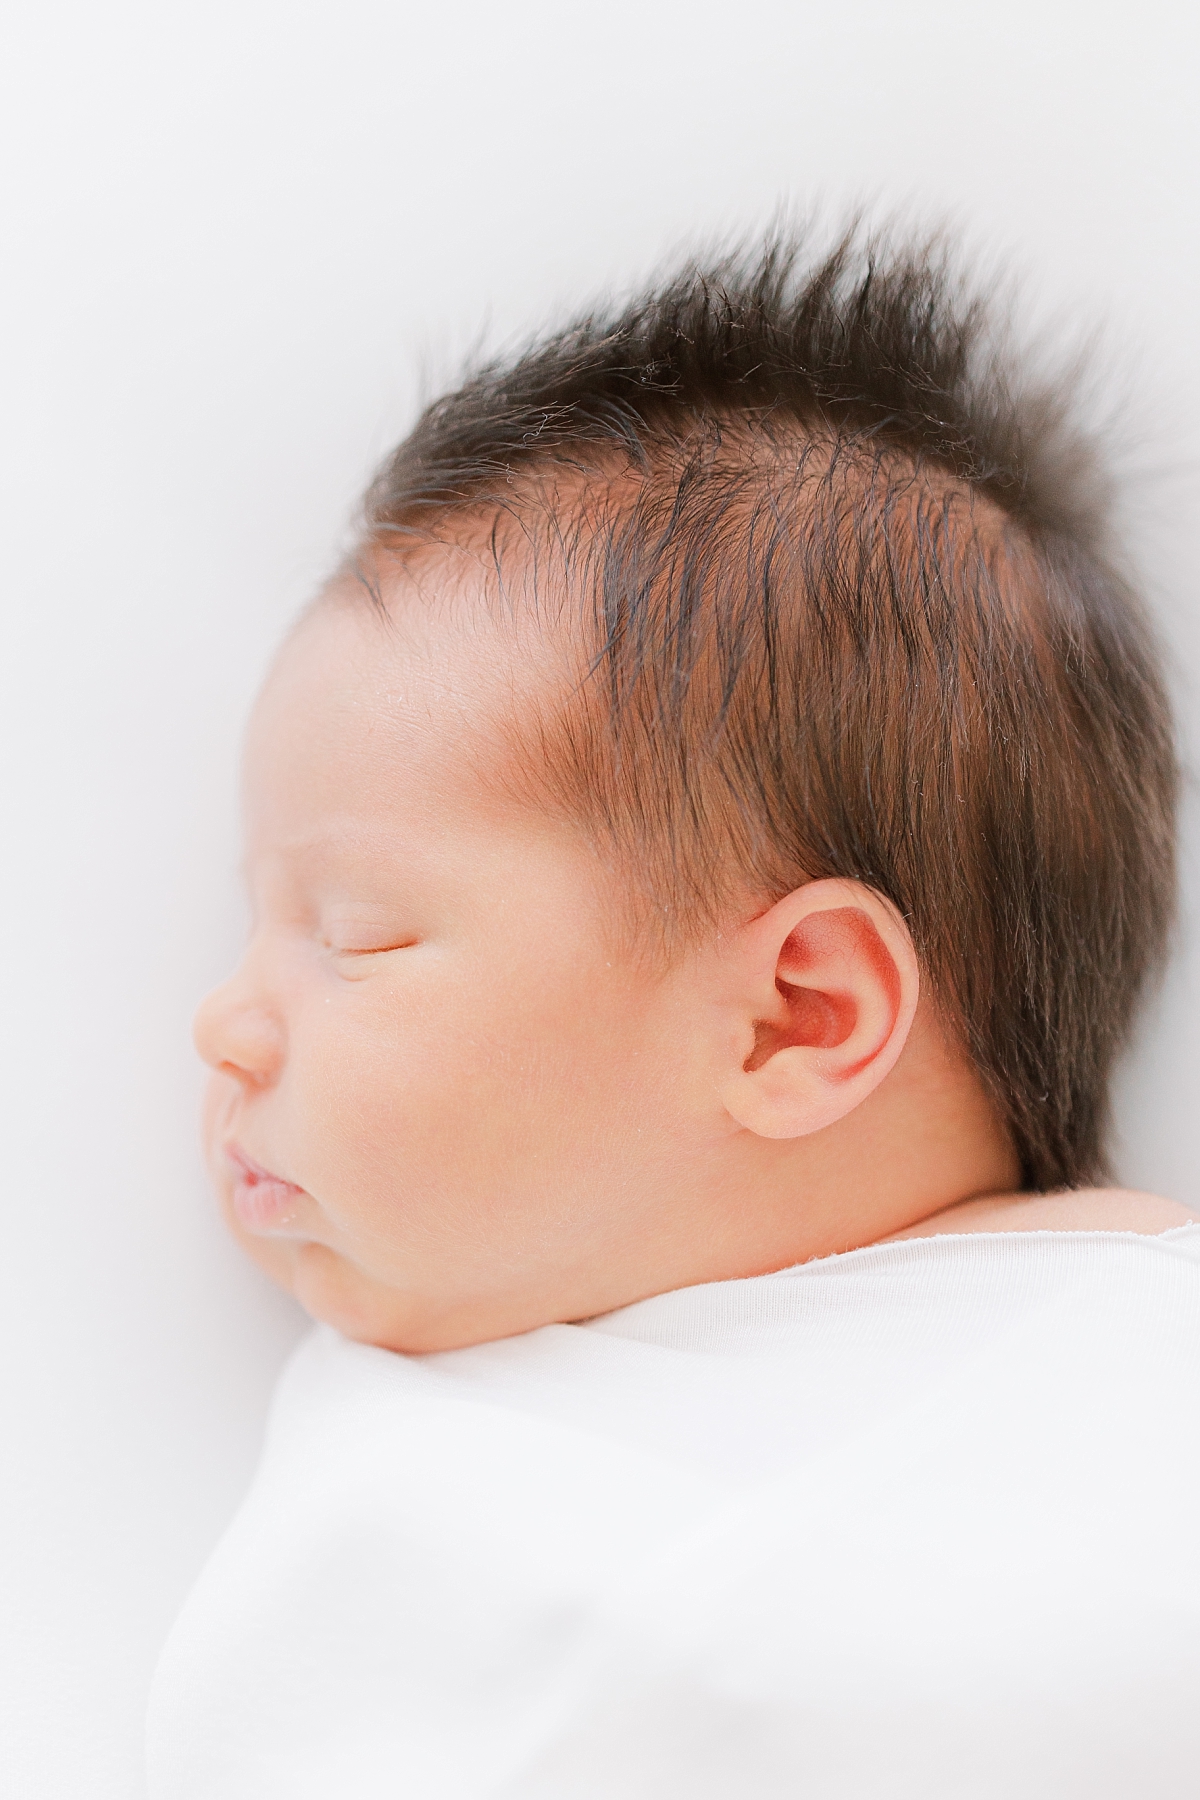 newborn baby with lots of hair